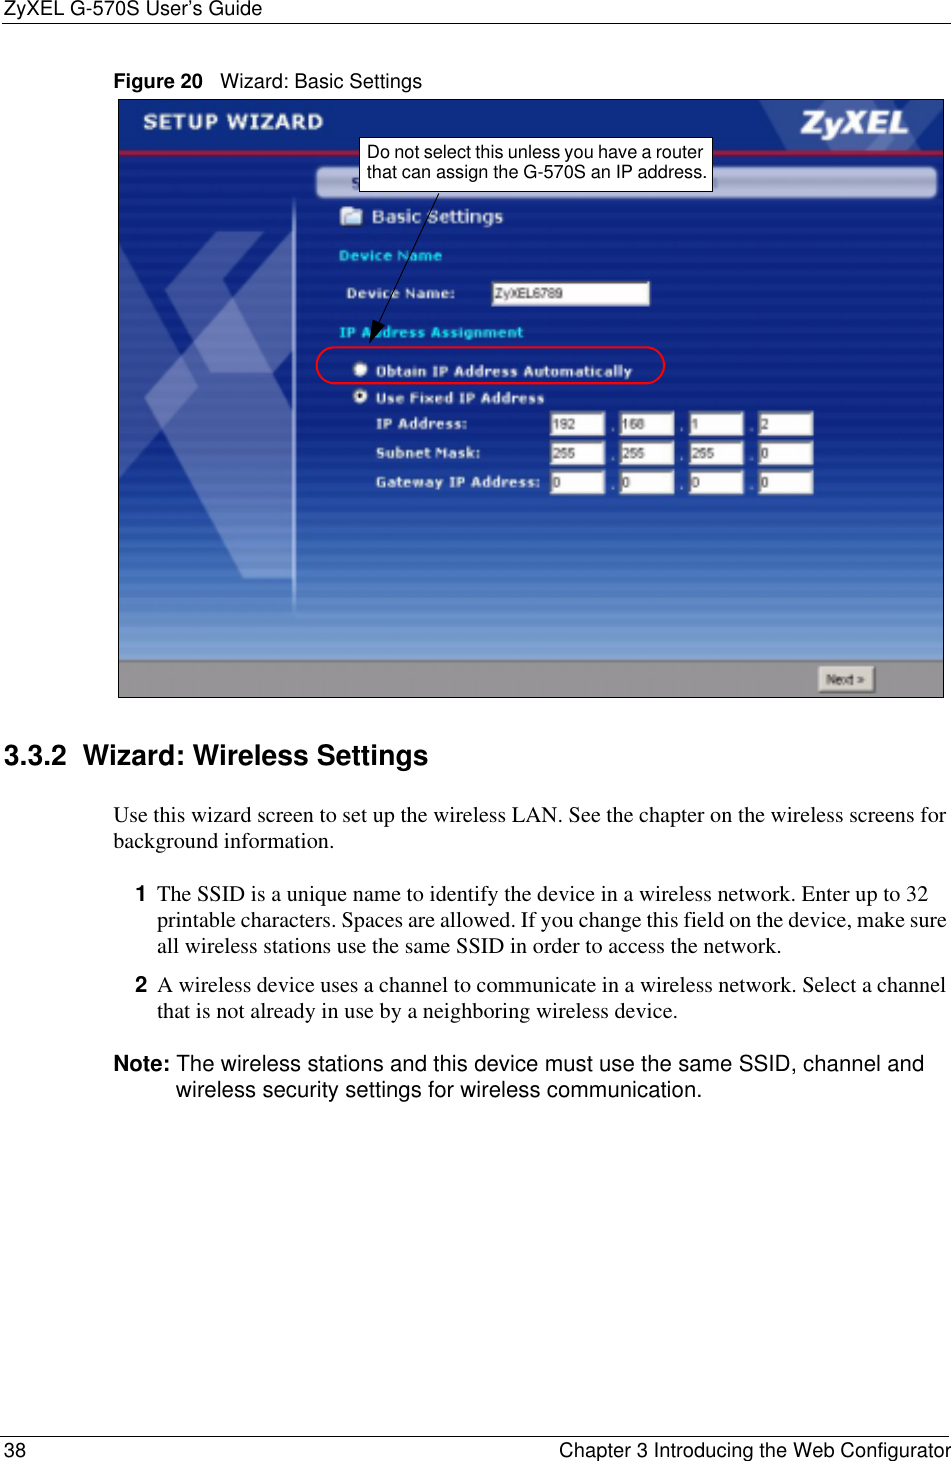 ZyXEL G-570S User’s Guide38 Chapter 3 Introducing the Web ConfiguratorFigure 20   Wizard: Basic Settings3.3.2  Wizard: Wireless SettingsUse this wizard screen to set up the wireless LAN. See the chapter on the wireless screens for background information.1The SSID is a unique name to identify the device in a wireless network. Enter up to 32 printable characters. Spaces are allowed. If you change this field on the device, make sure all wireless stations use the same SSID in order to access the network.2A wireless device uses a channel to communicate in a wireless network. Select a channel that is not already in use by a neighboring wireless device.Note: The wireless stations and this device must use the same SSID, channel and wireless security settings for wireless communication.Do not select this unless you have a router that can assign the G-570S an IP address.